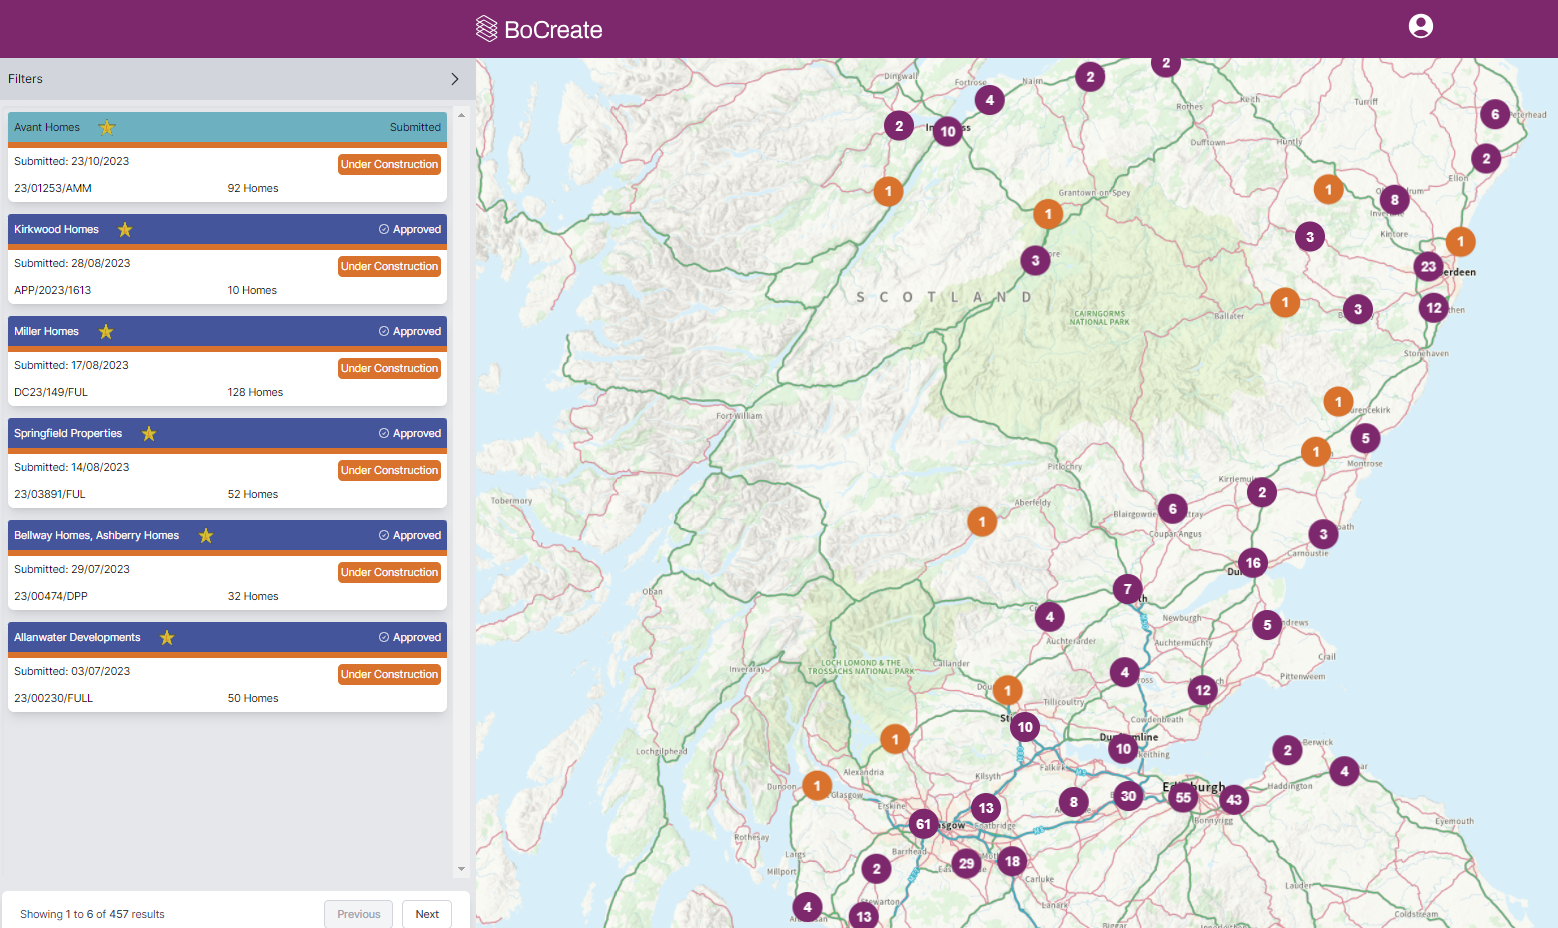 New sales and planning data tool assisting Scotland's homebuilding sector